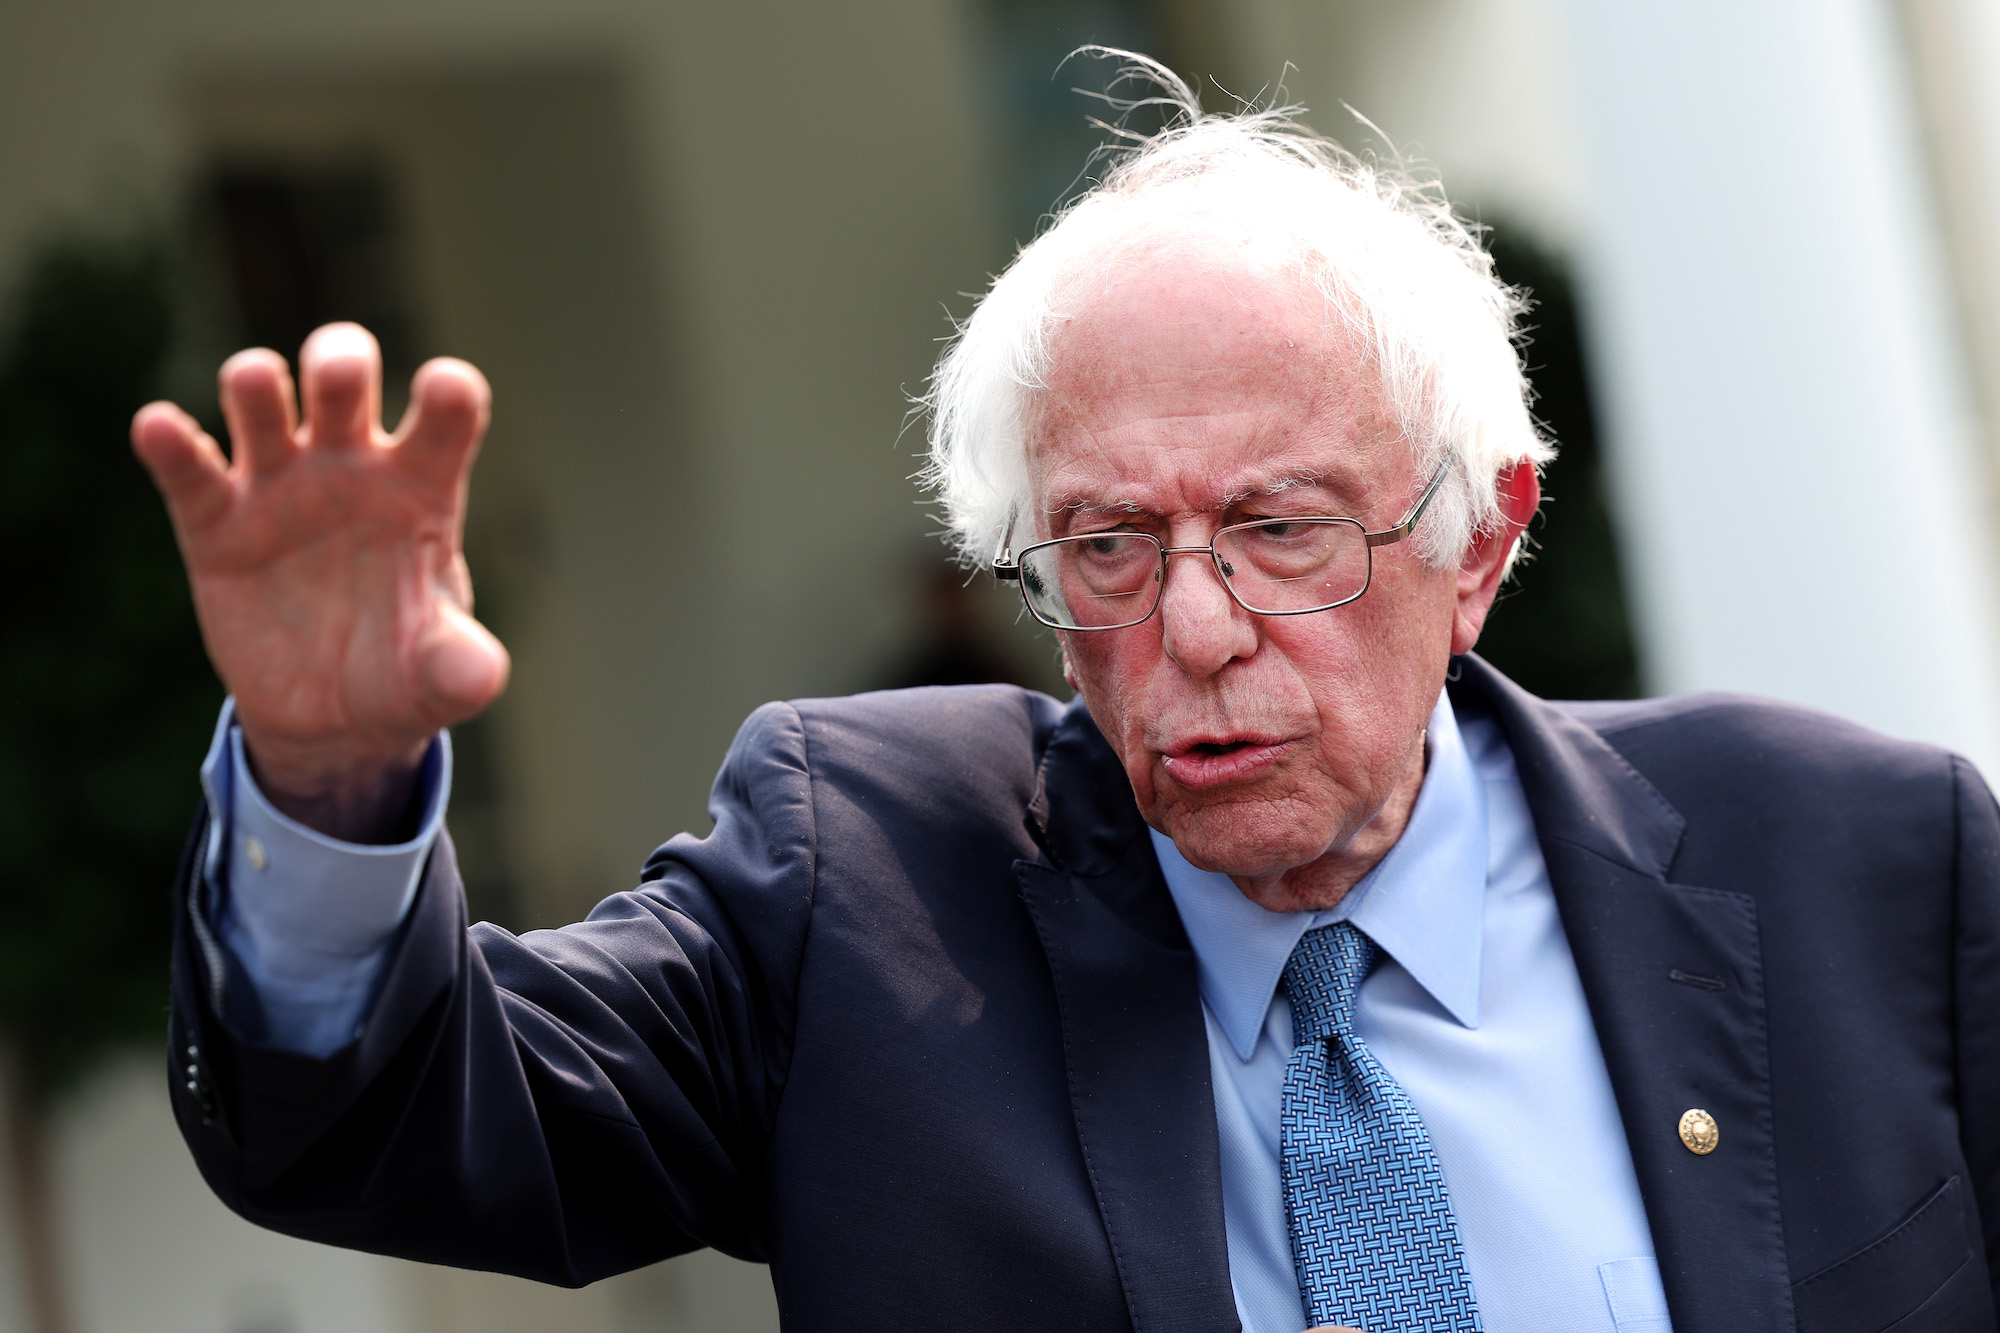 sanders predicts dems will ‘rally ‘round’ biden because trump is ‘one of most dangerous’ figures in modern history